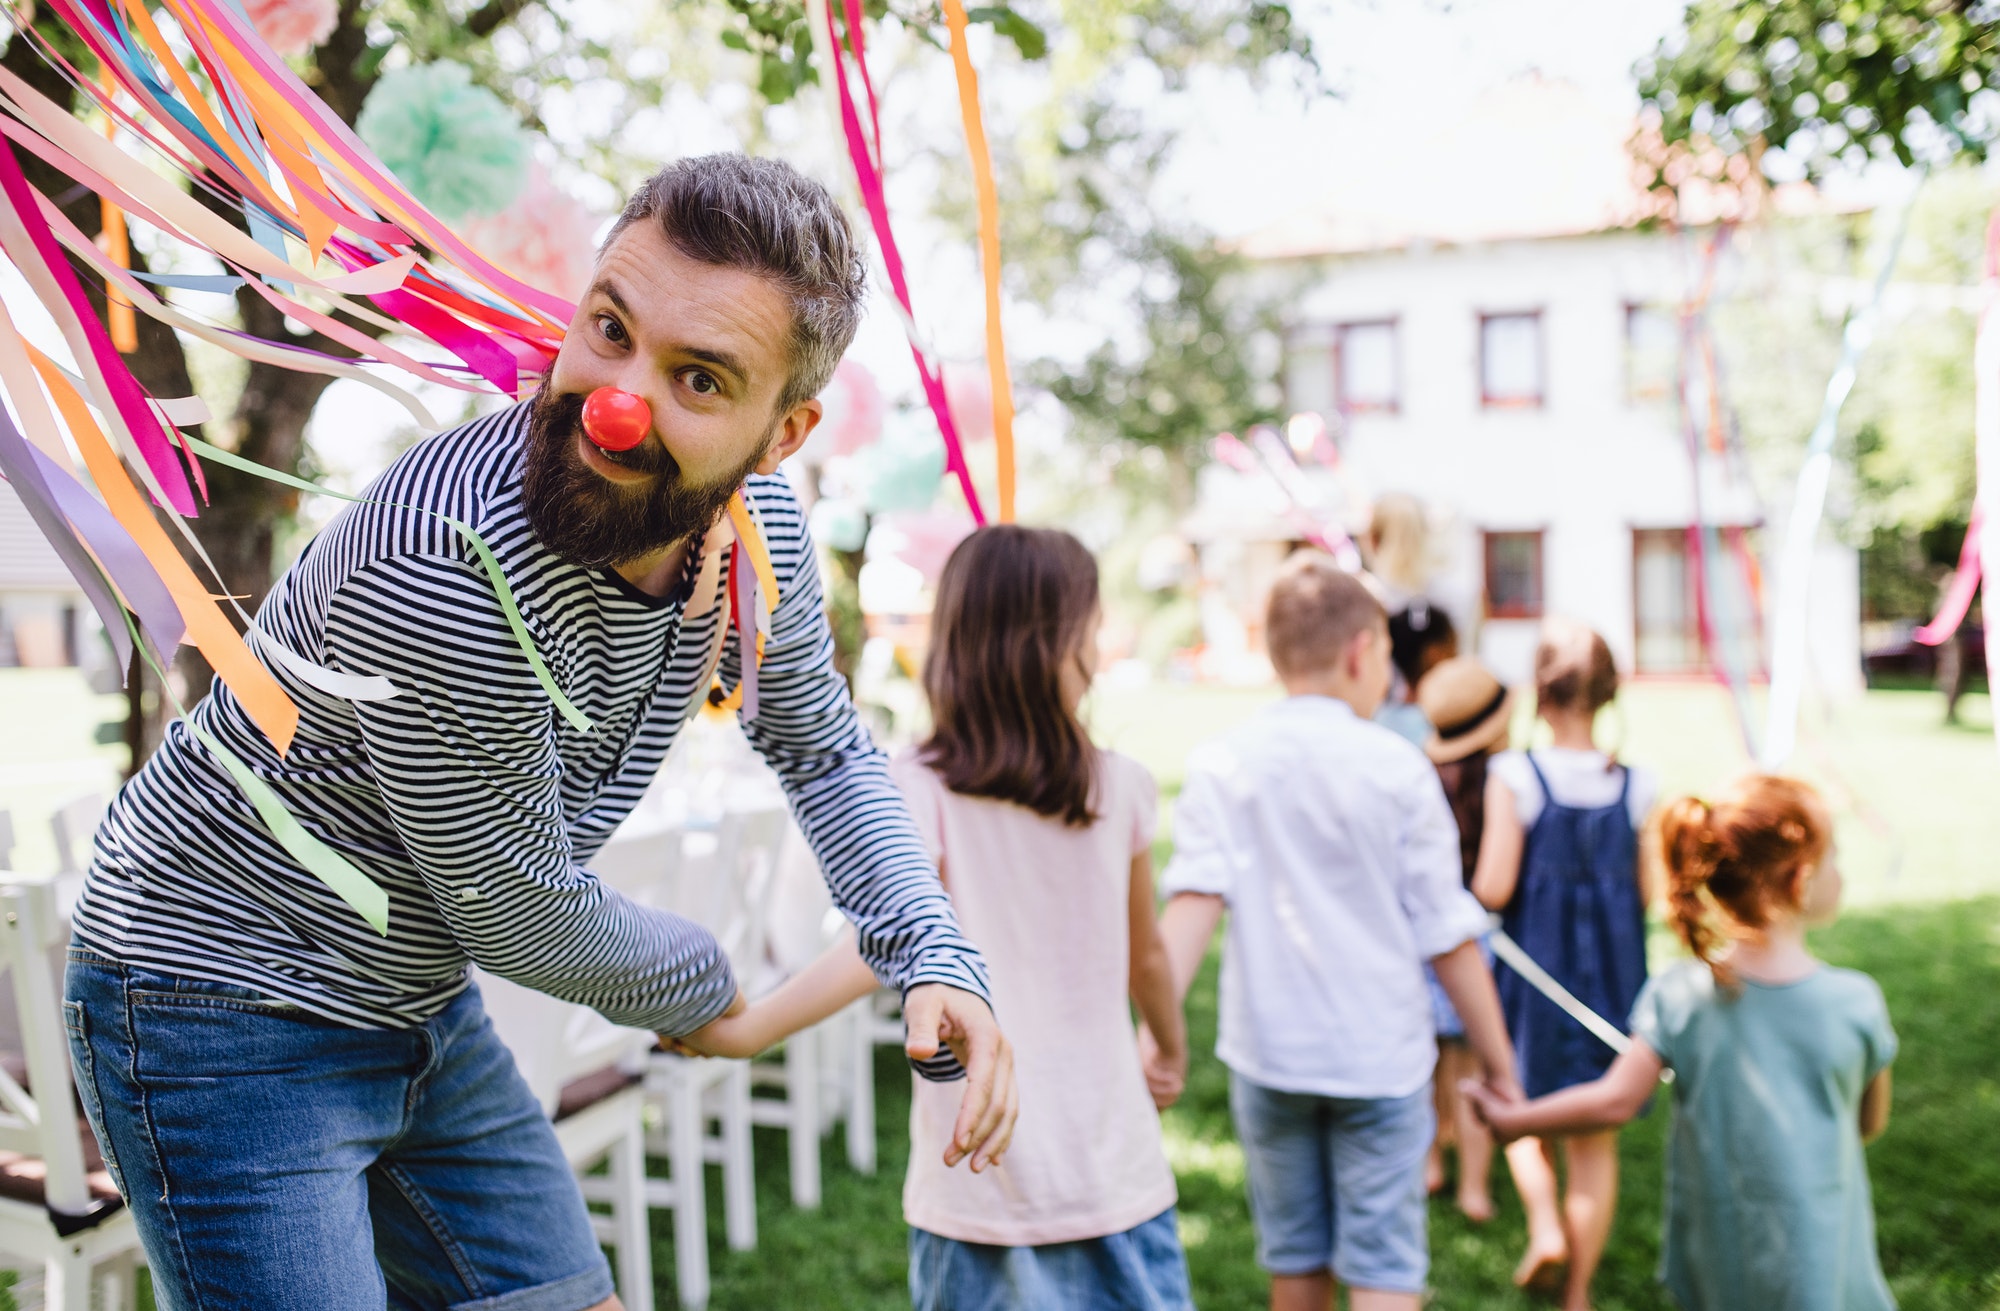 Man with kids on birthday party playing outdoors in garden in summer.